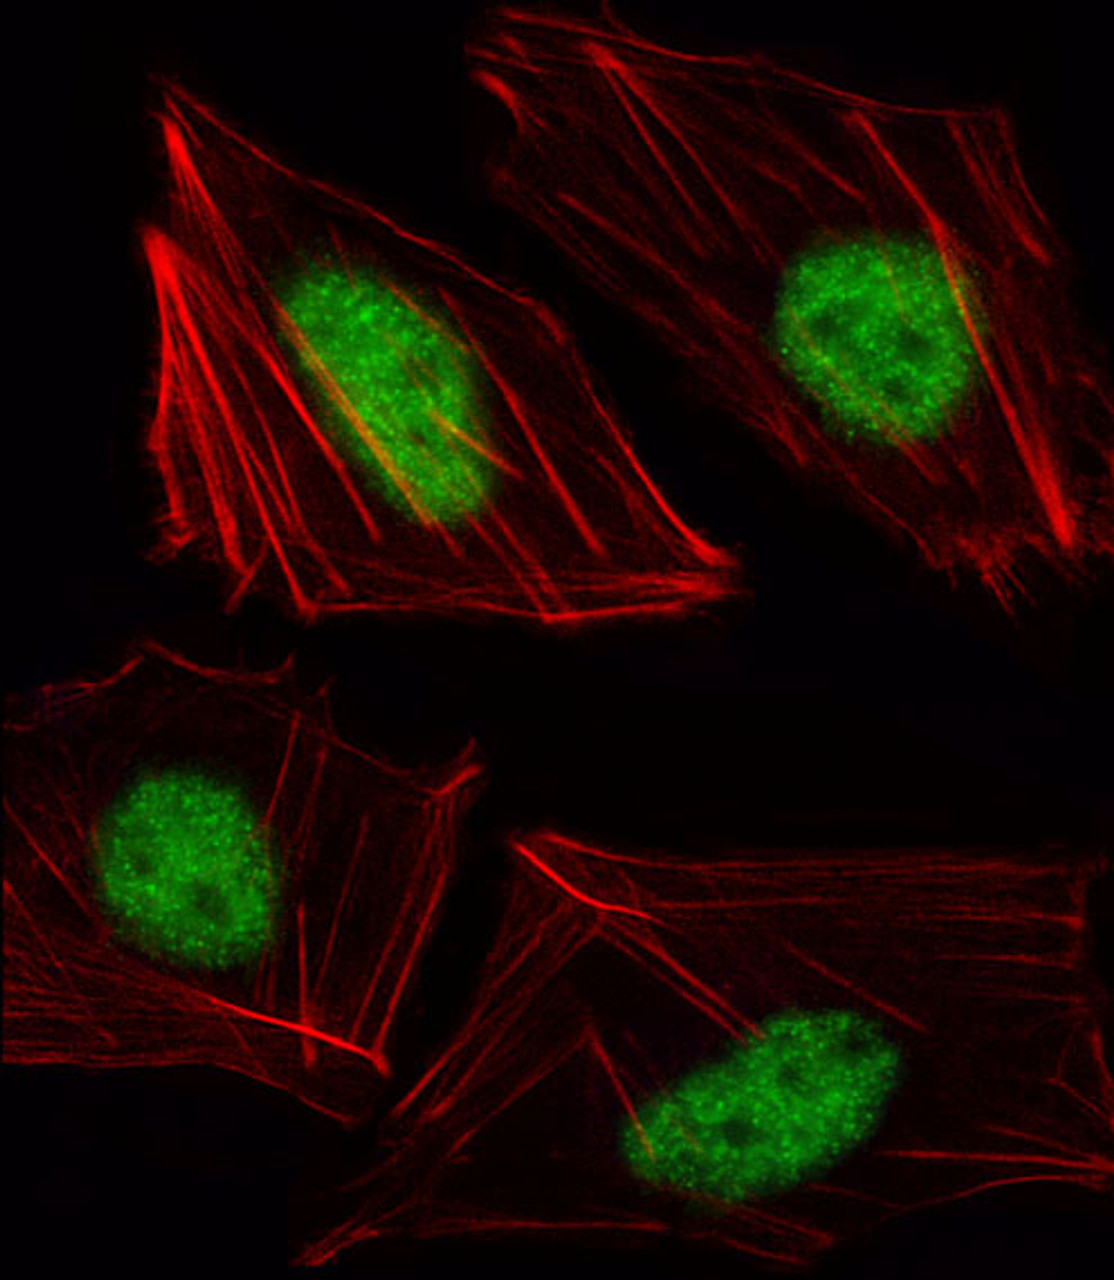 Fluorescent image of HUVEC cell stained with TBX15 Antibody (N-term) .HUVEC cells were fixed with 4% PFA (20 min) , permeabilized with Triton X-100 (0.1%, 10 min) , then incubated with TBX15 primary antibody (1:25) . For secondary antibody, Alexa Fluor 488 conjugated donkey anti-rabbit antibody (green) was used (1:400) .Cytoplasmic actin was counterstained with Alexa Fluor 555 (red) conjugated Phalloidin (7units/ml) .TBX15 immunoreactivity is localized to Nucleus significantly.